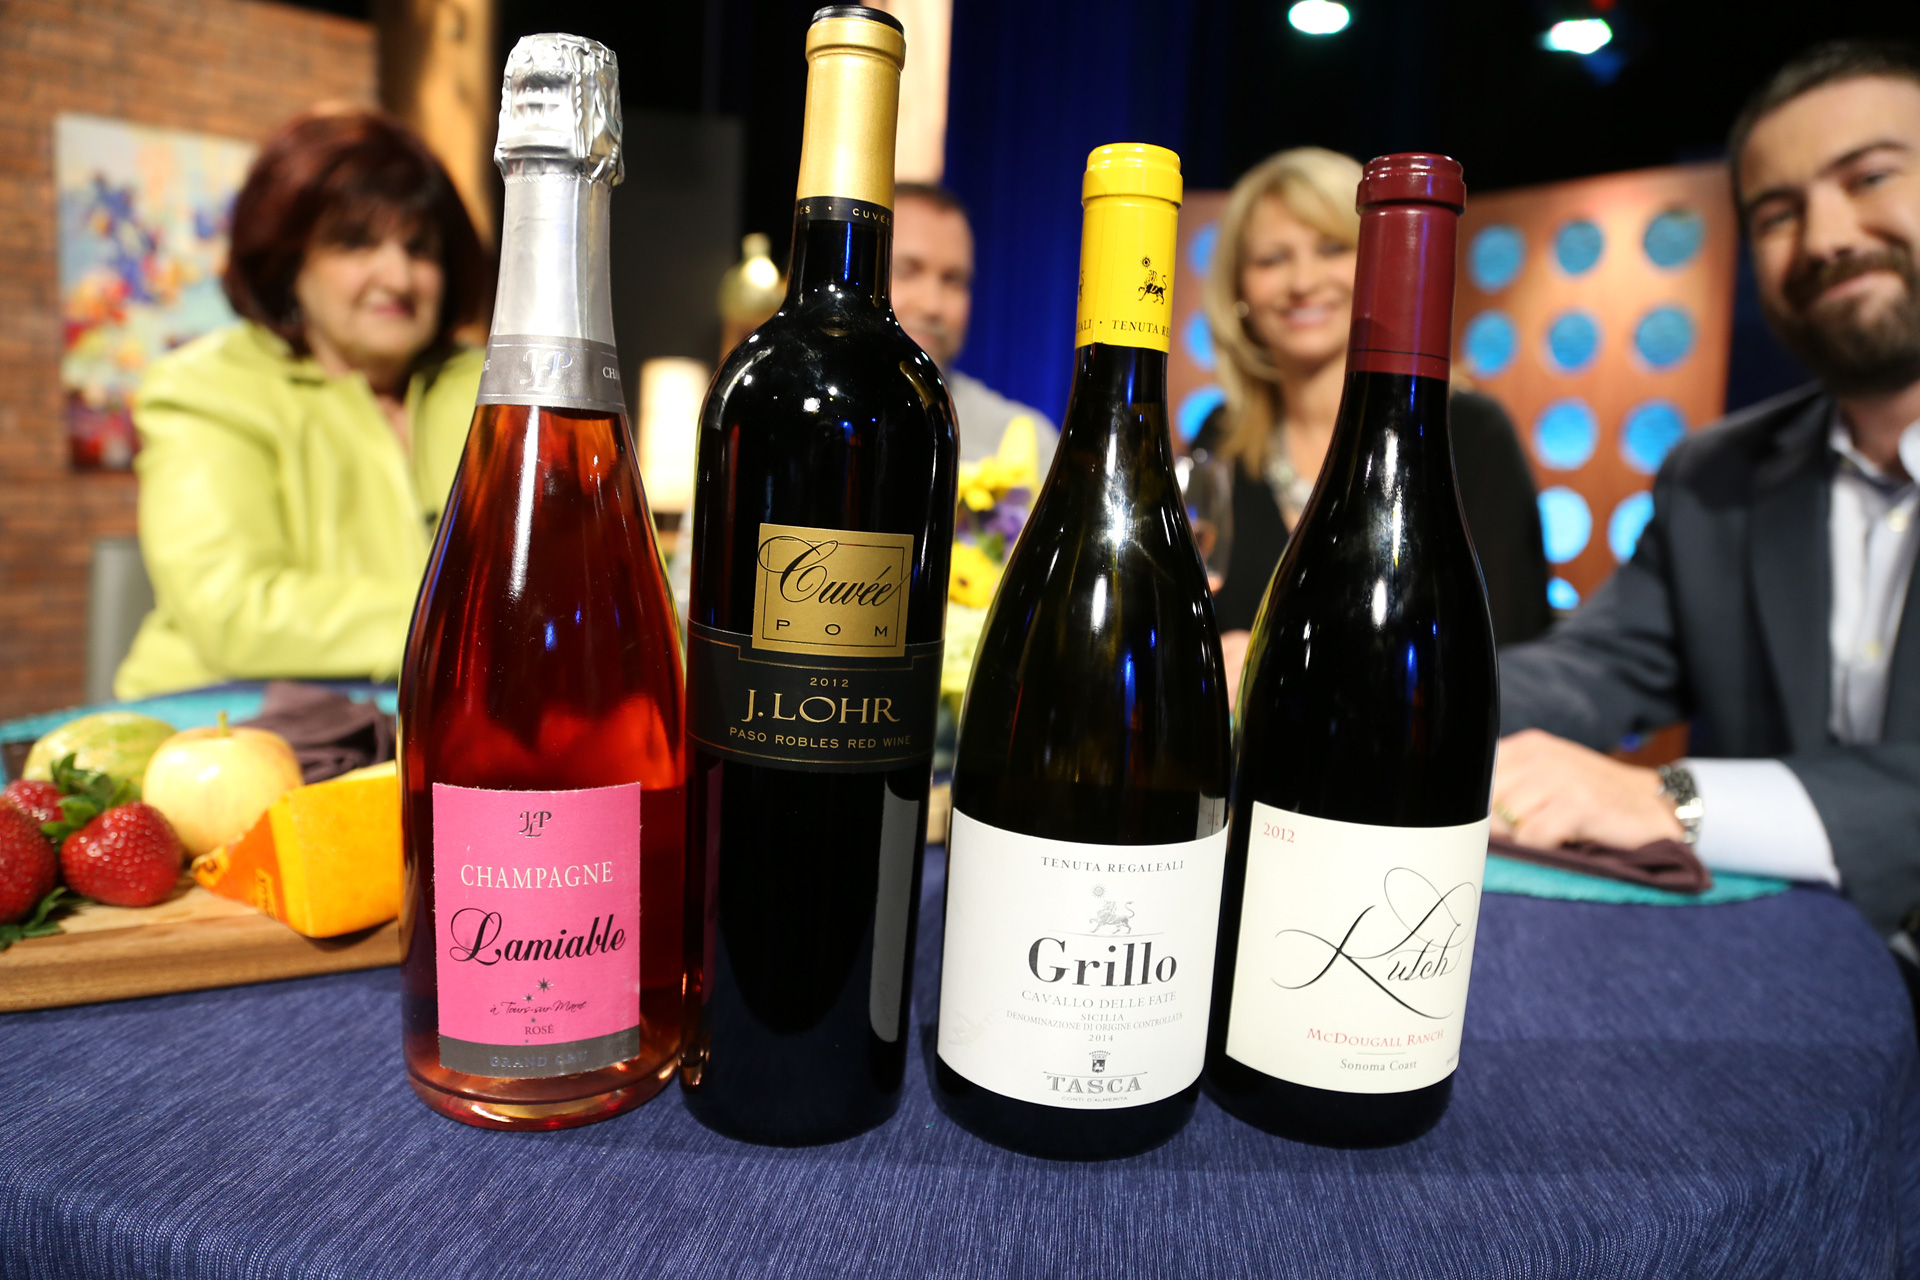 Wines that guests drank on the set of the sixteenth episode of season 11.